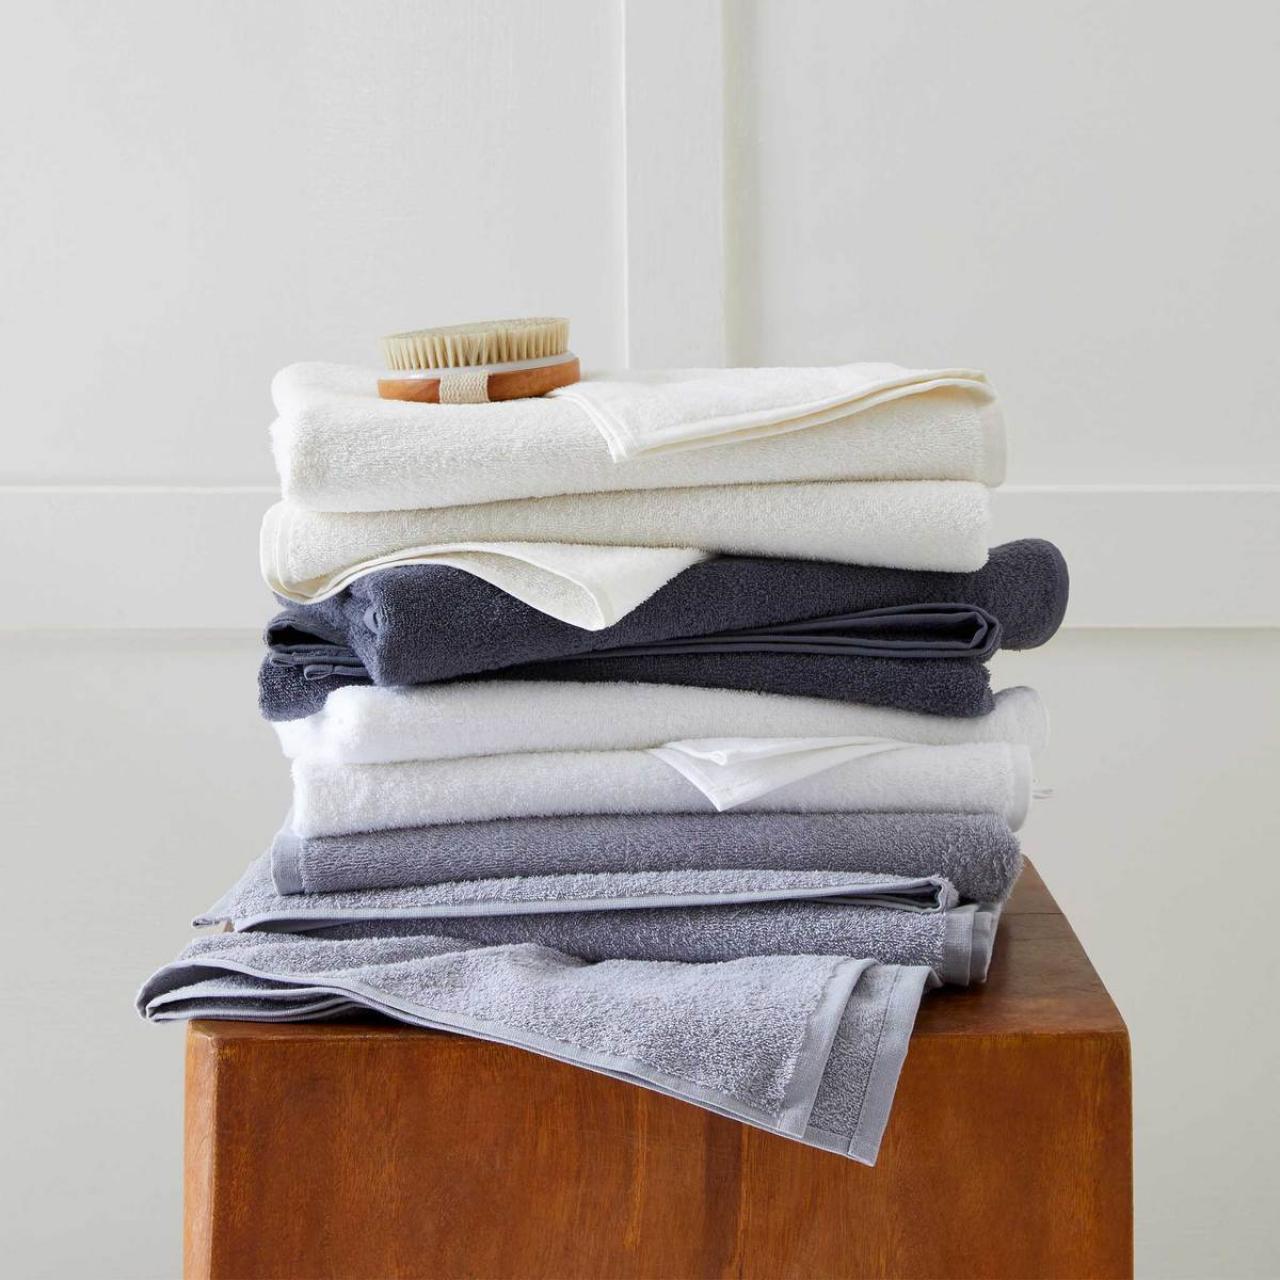 Brooklinen Cyber Monday Sale: Take 25% Off Sheets, Towels and More